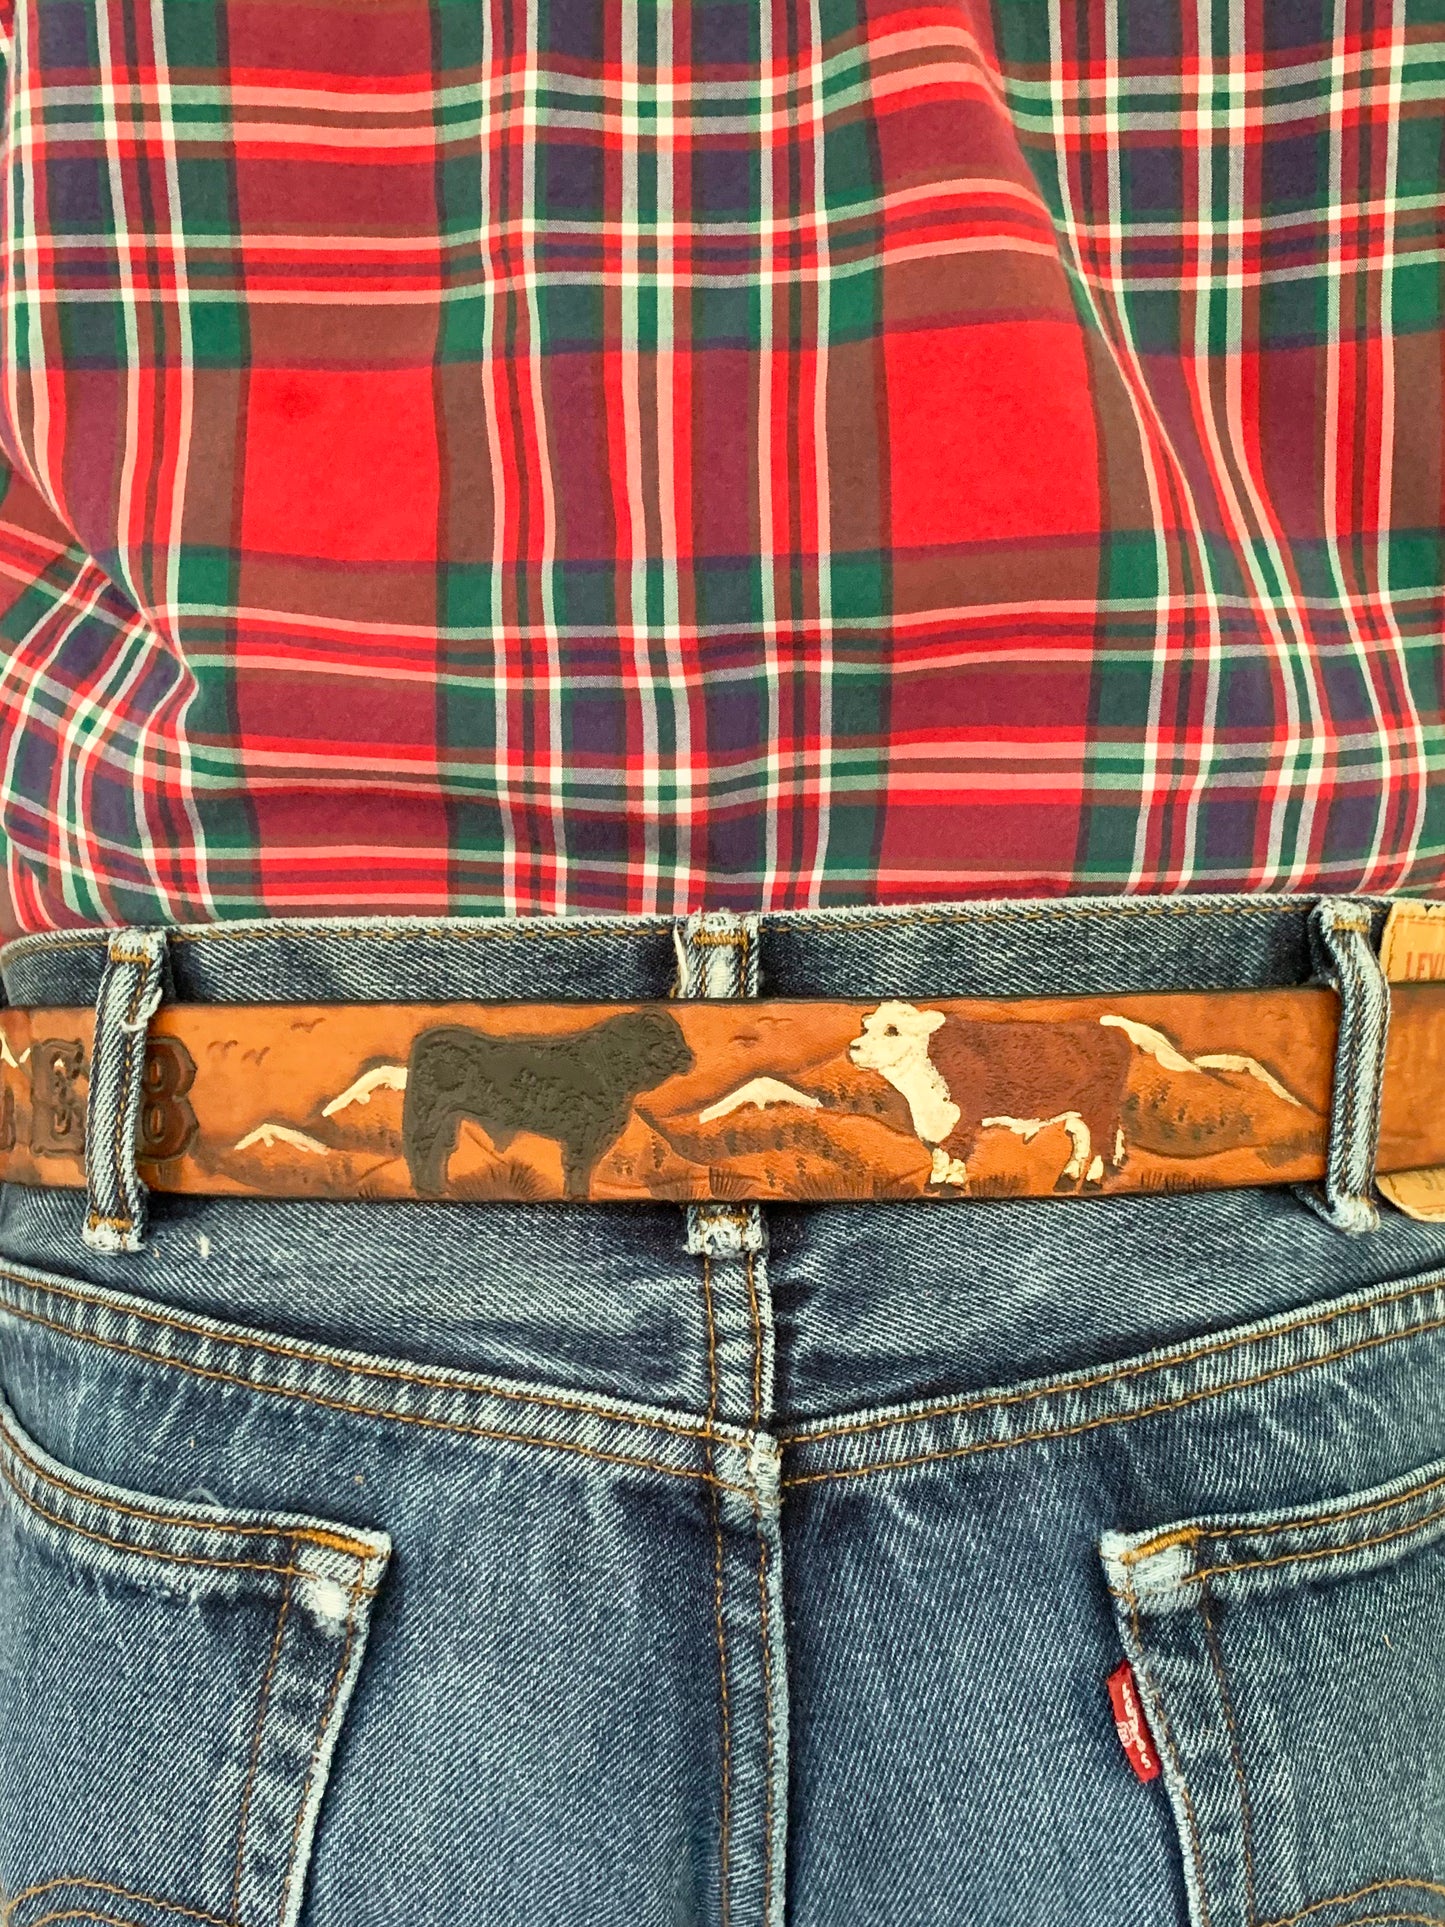 Personalized Mountain Cows Antiqued Leather Name Belt